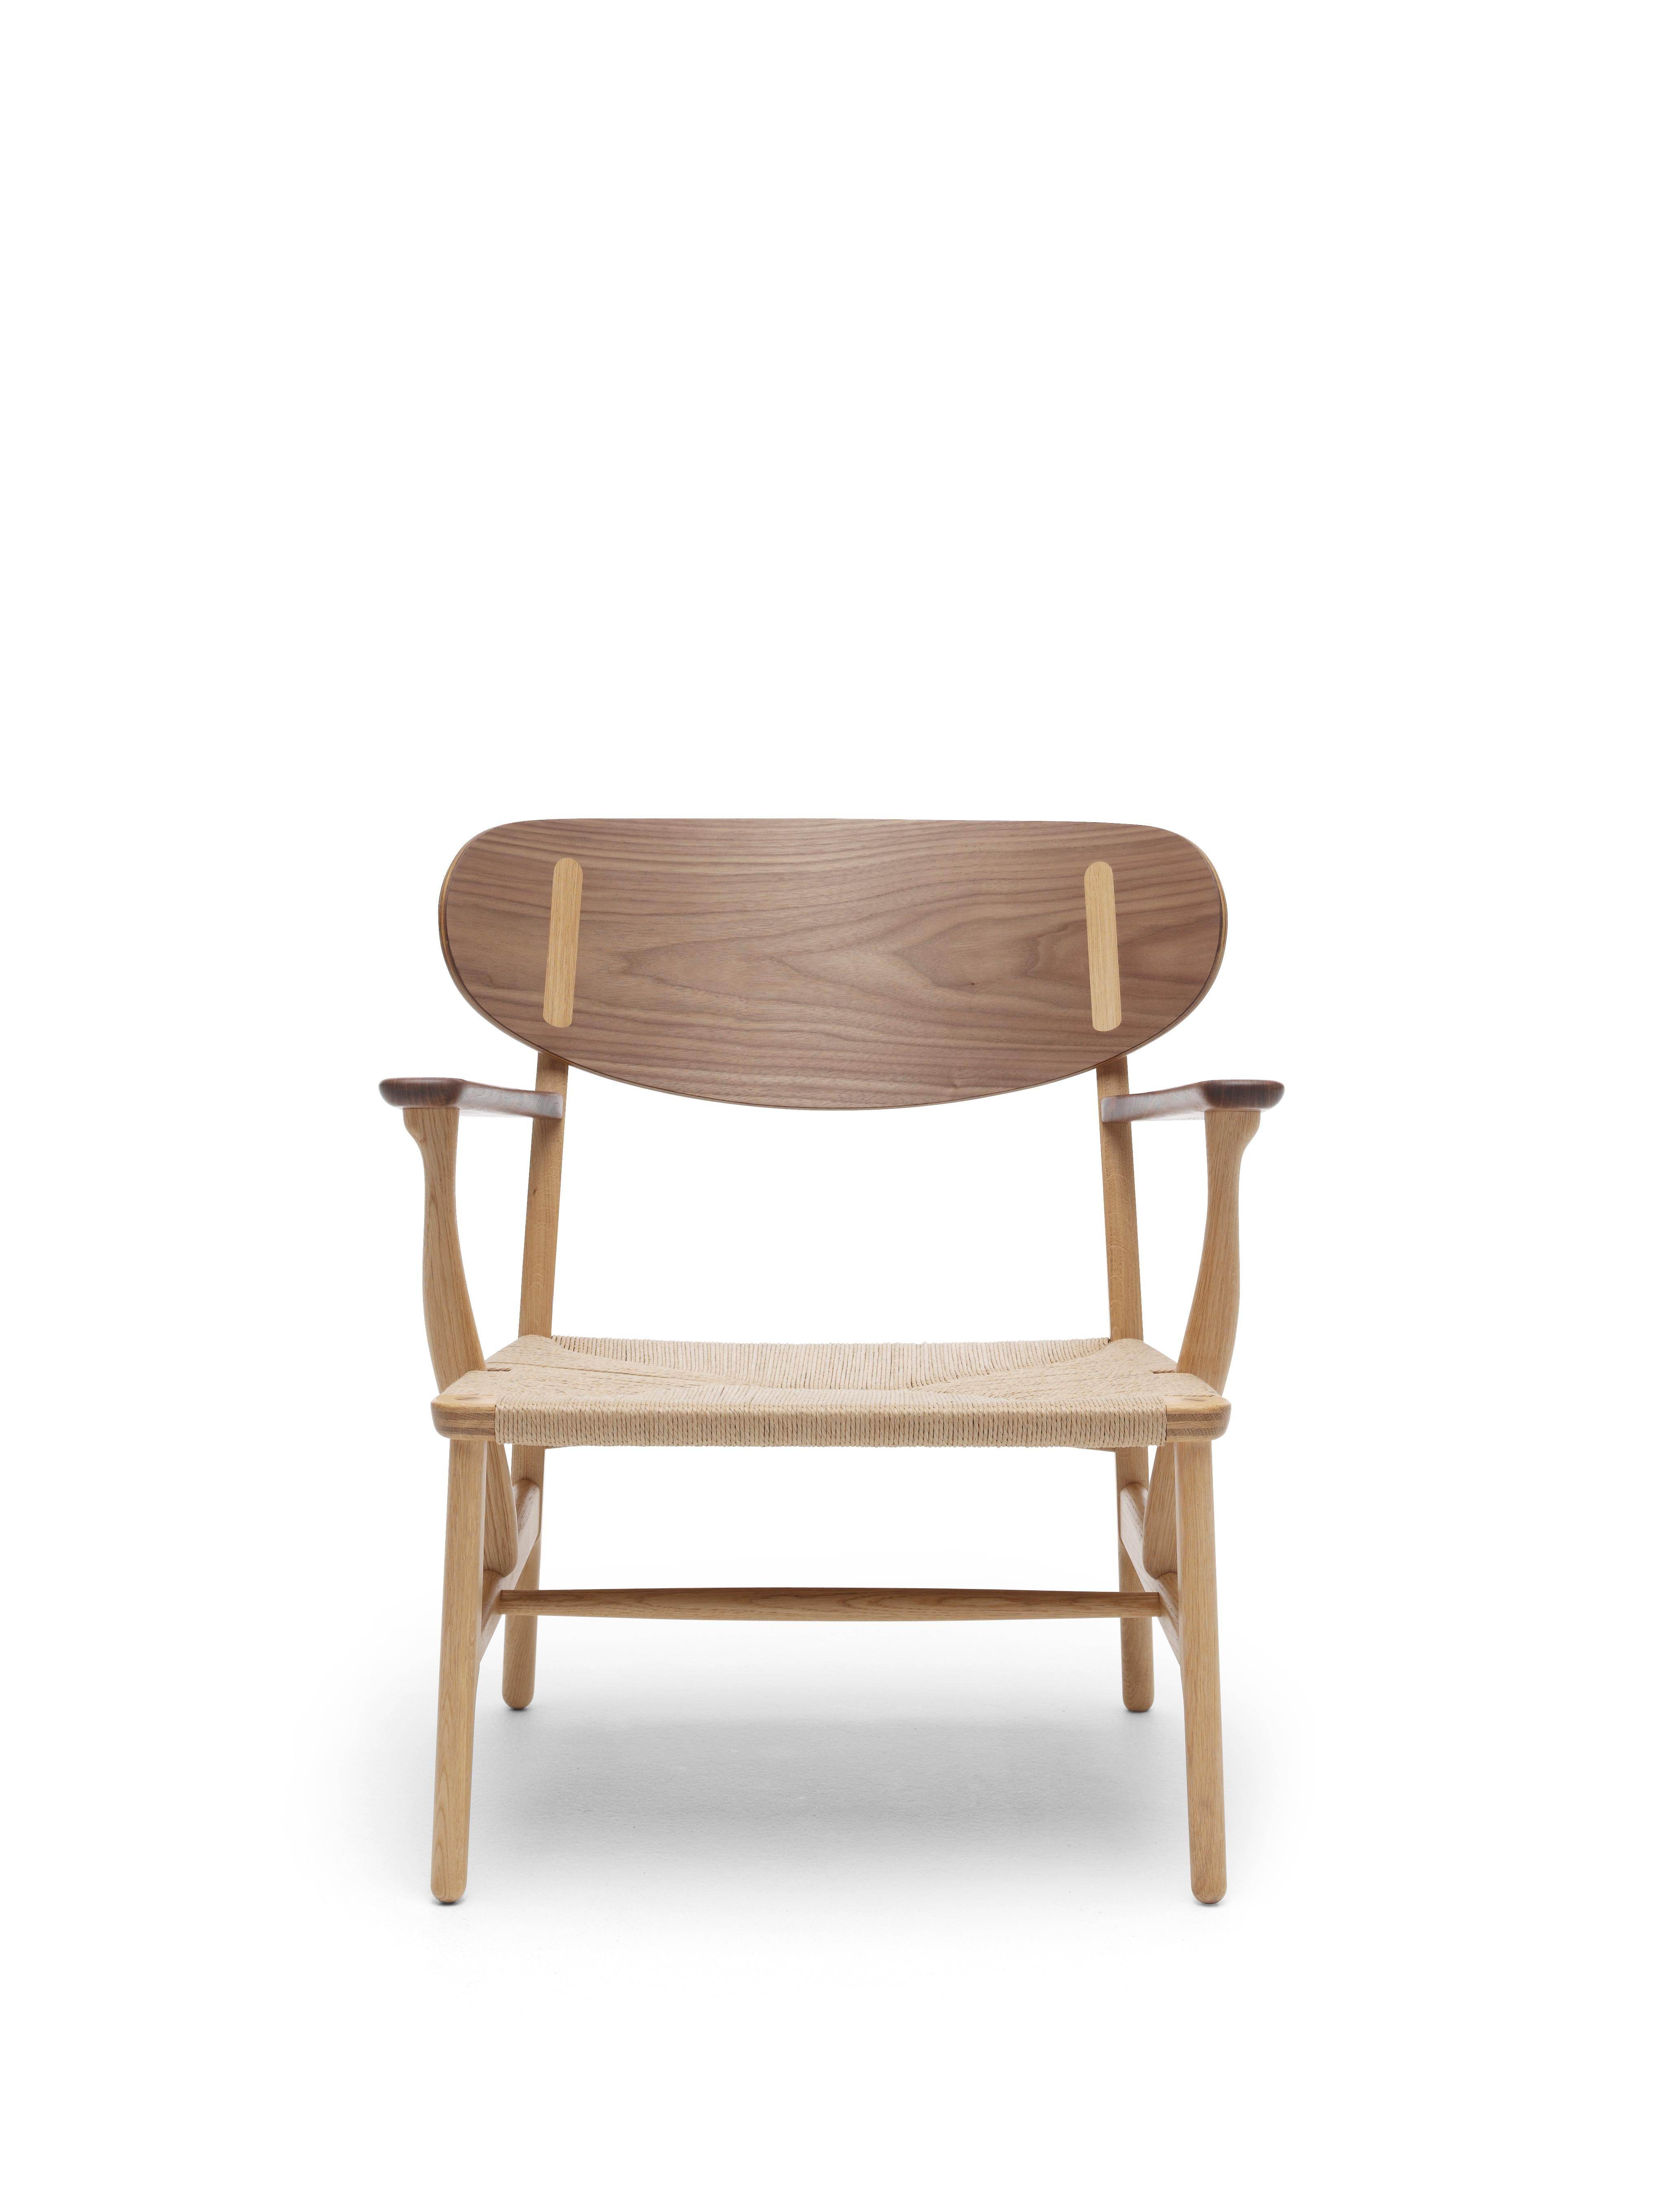 Brown (Oak/Walnut) CH22 Lounge Chair in Wood with Natural Papercord Seat by Hans J. Wegner